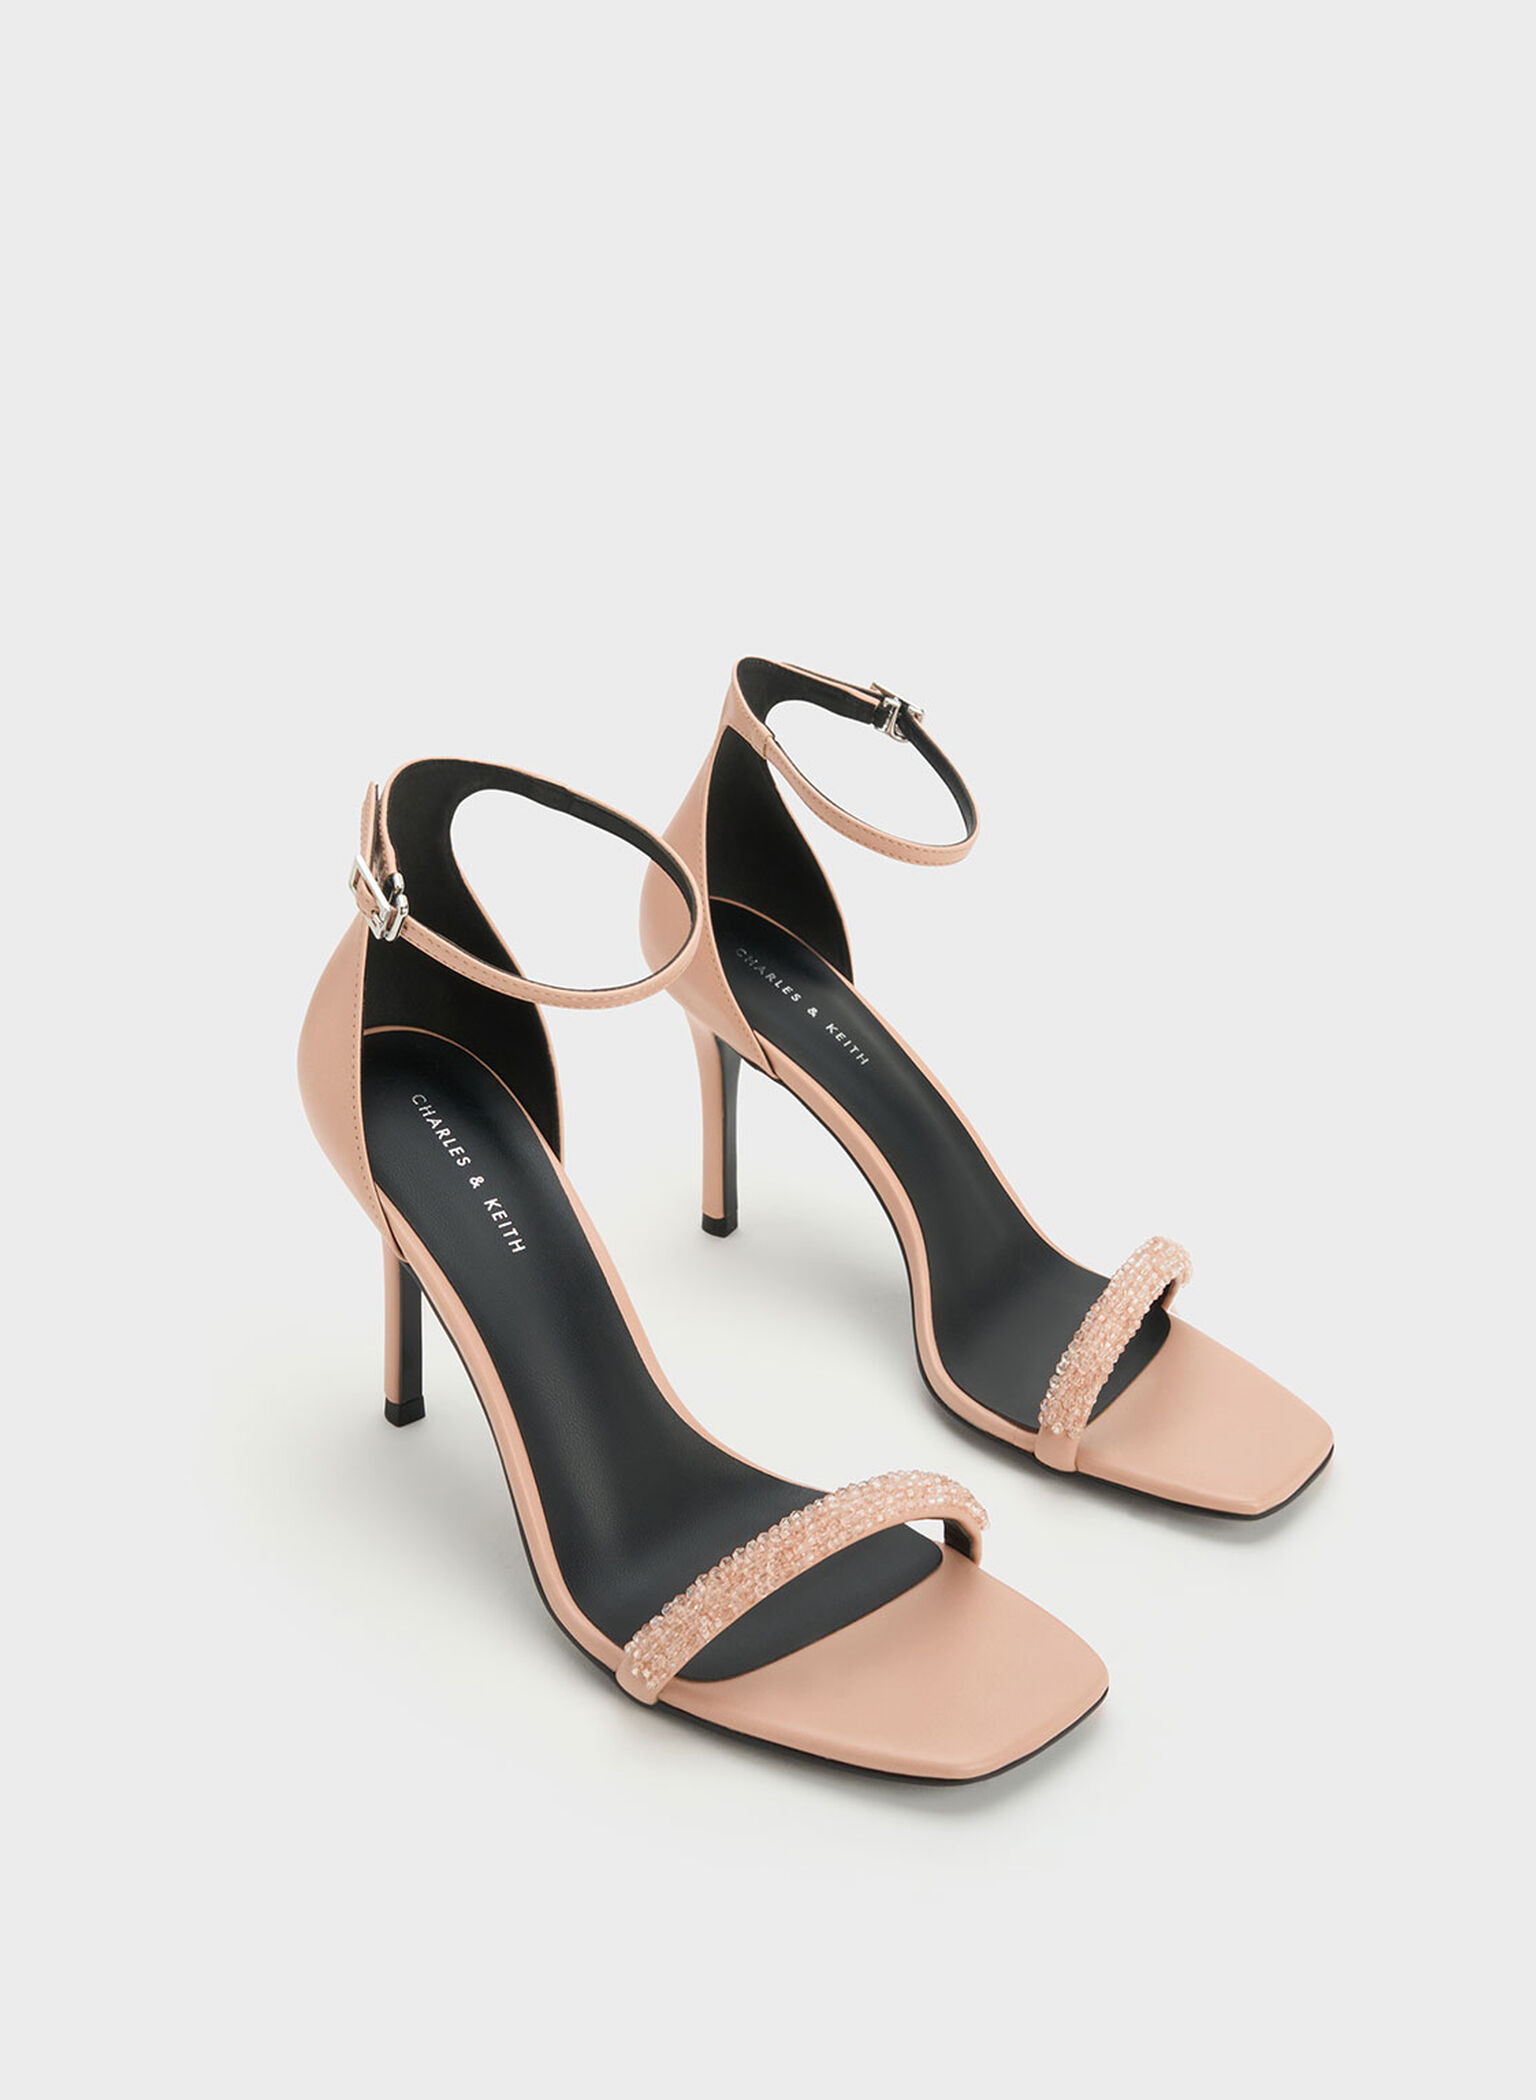 Nude Beaded Strap Heeled Sandals - CHARLES & KEITH PH